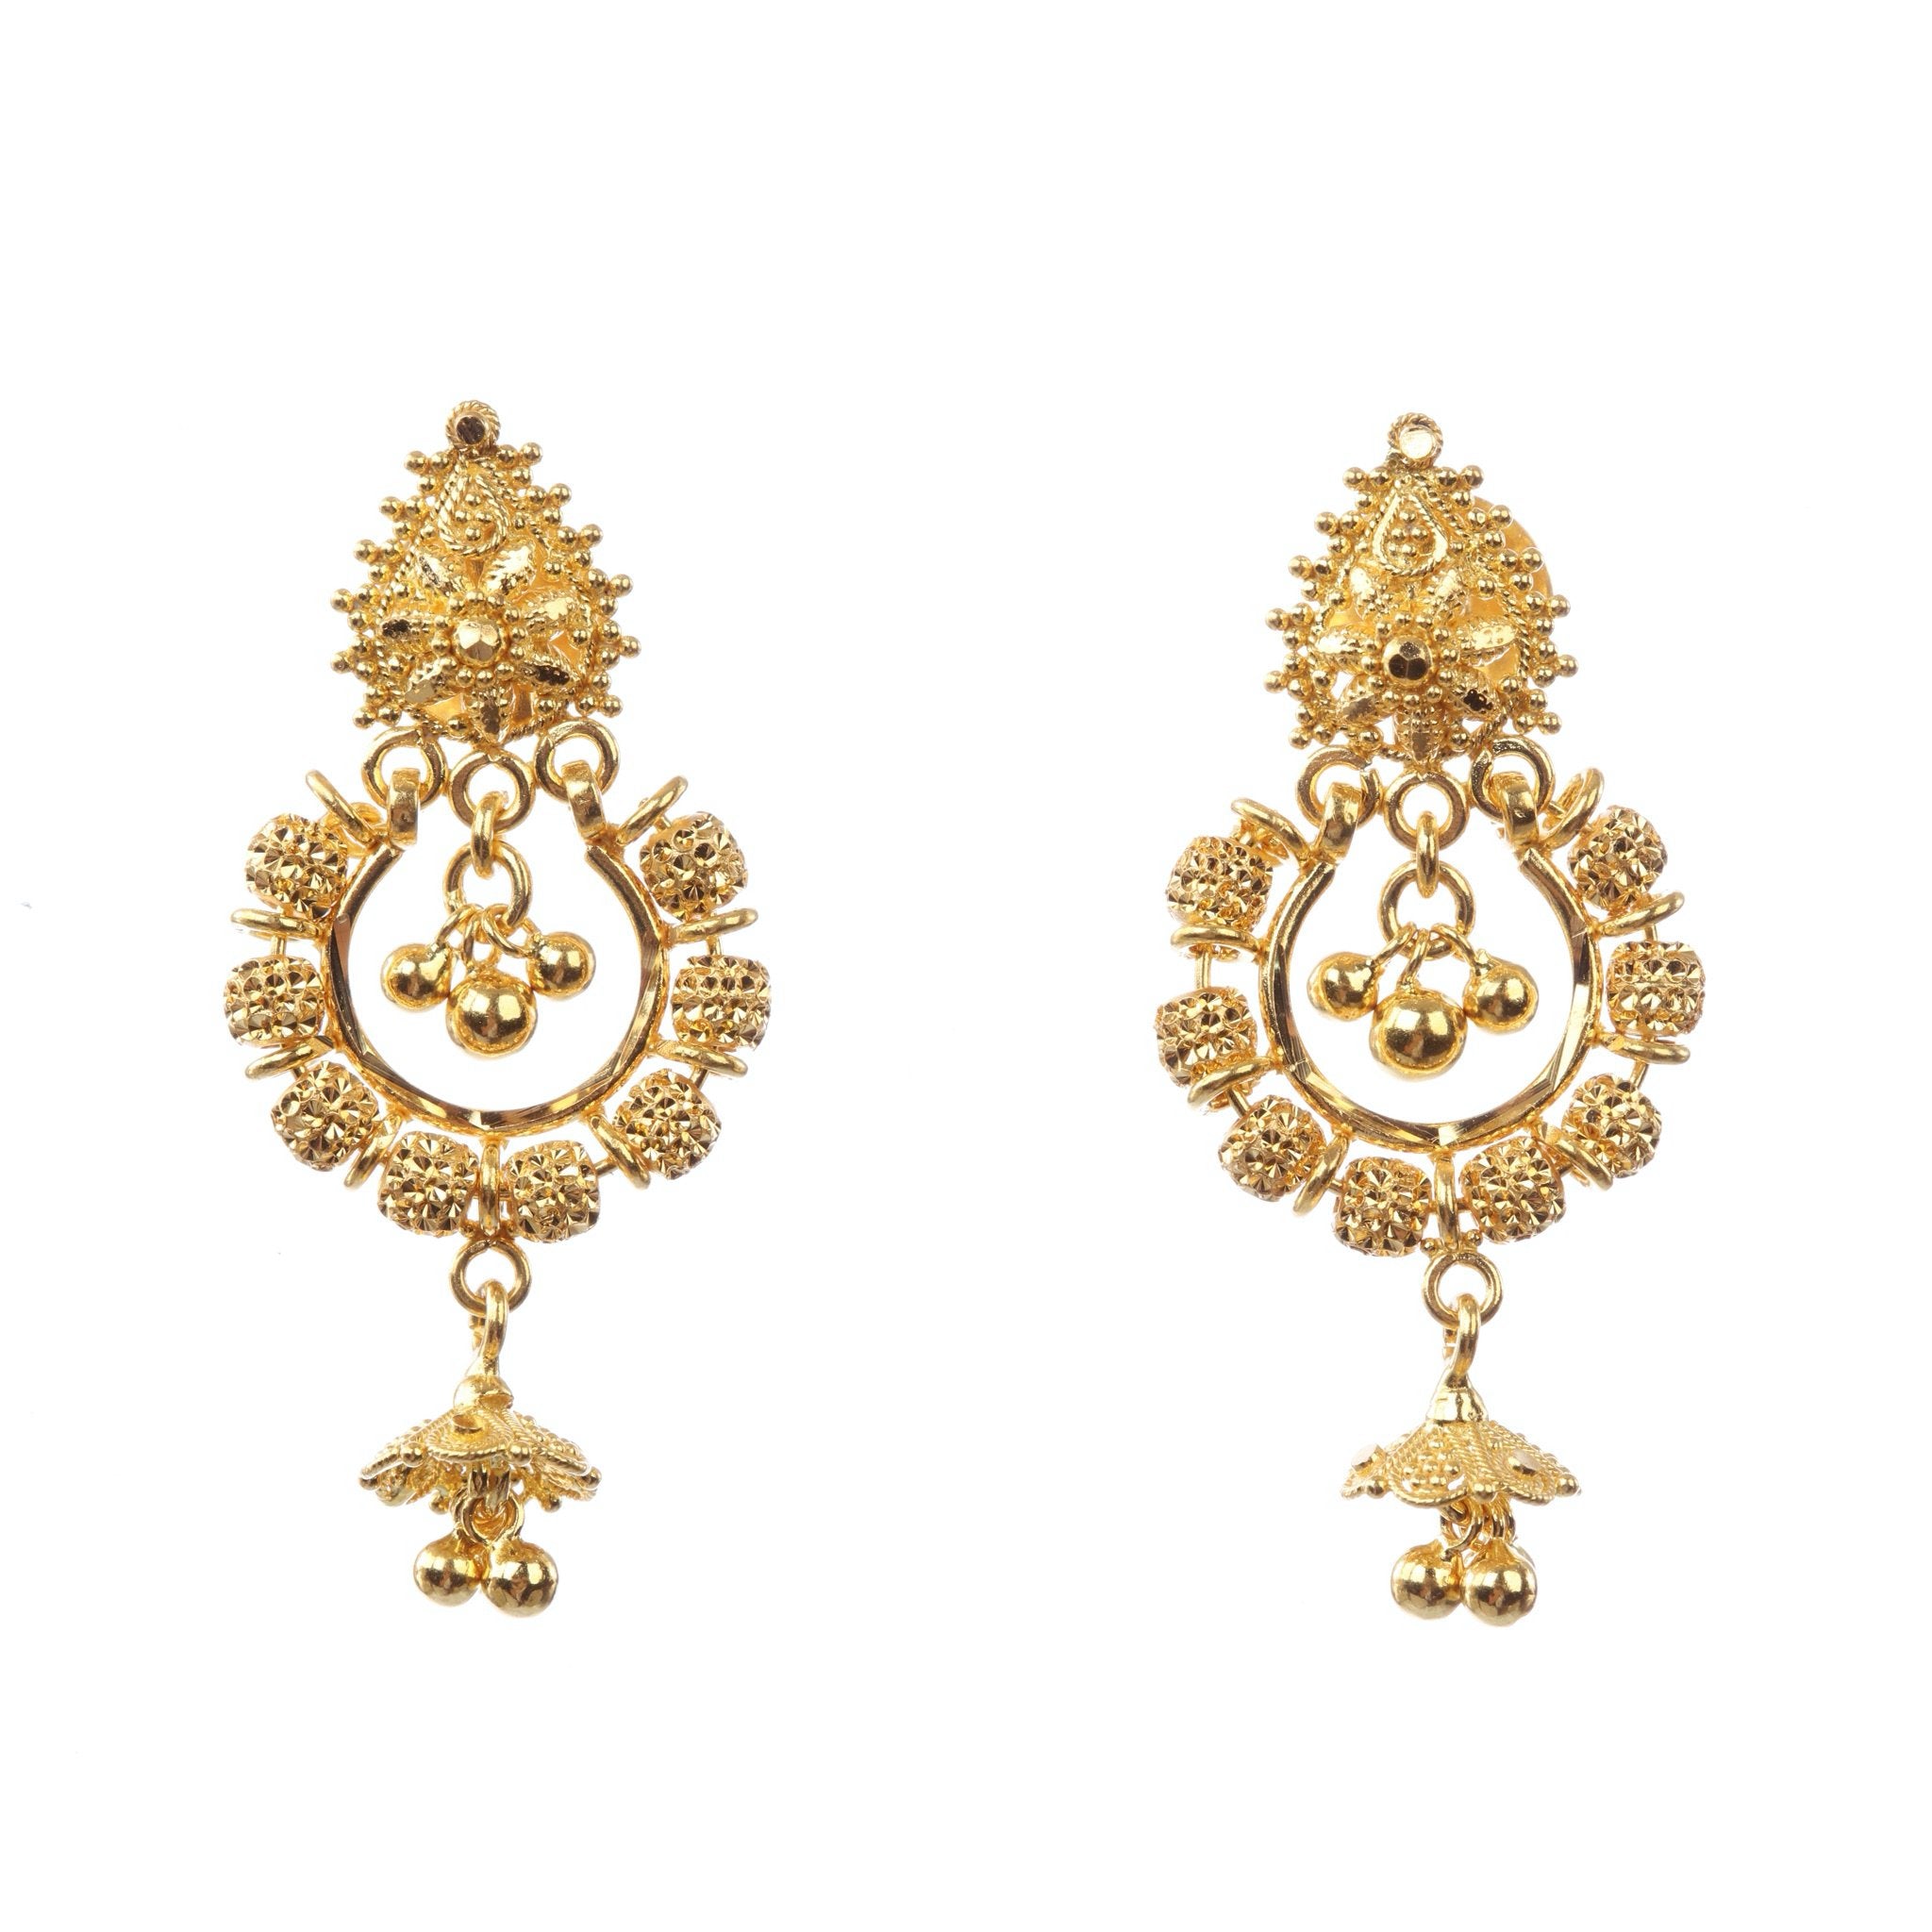 Stunning 2-Layer White CZ Stones Gold Earrings Design - Affordable  Artificial Design ER25885